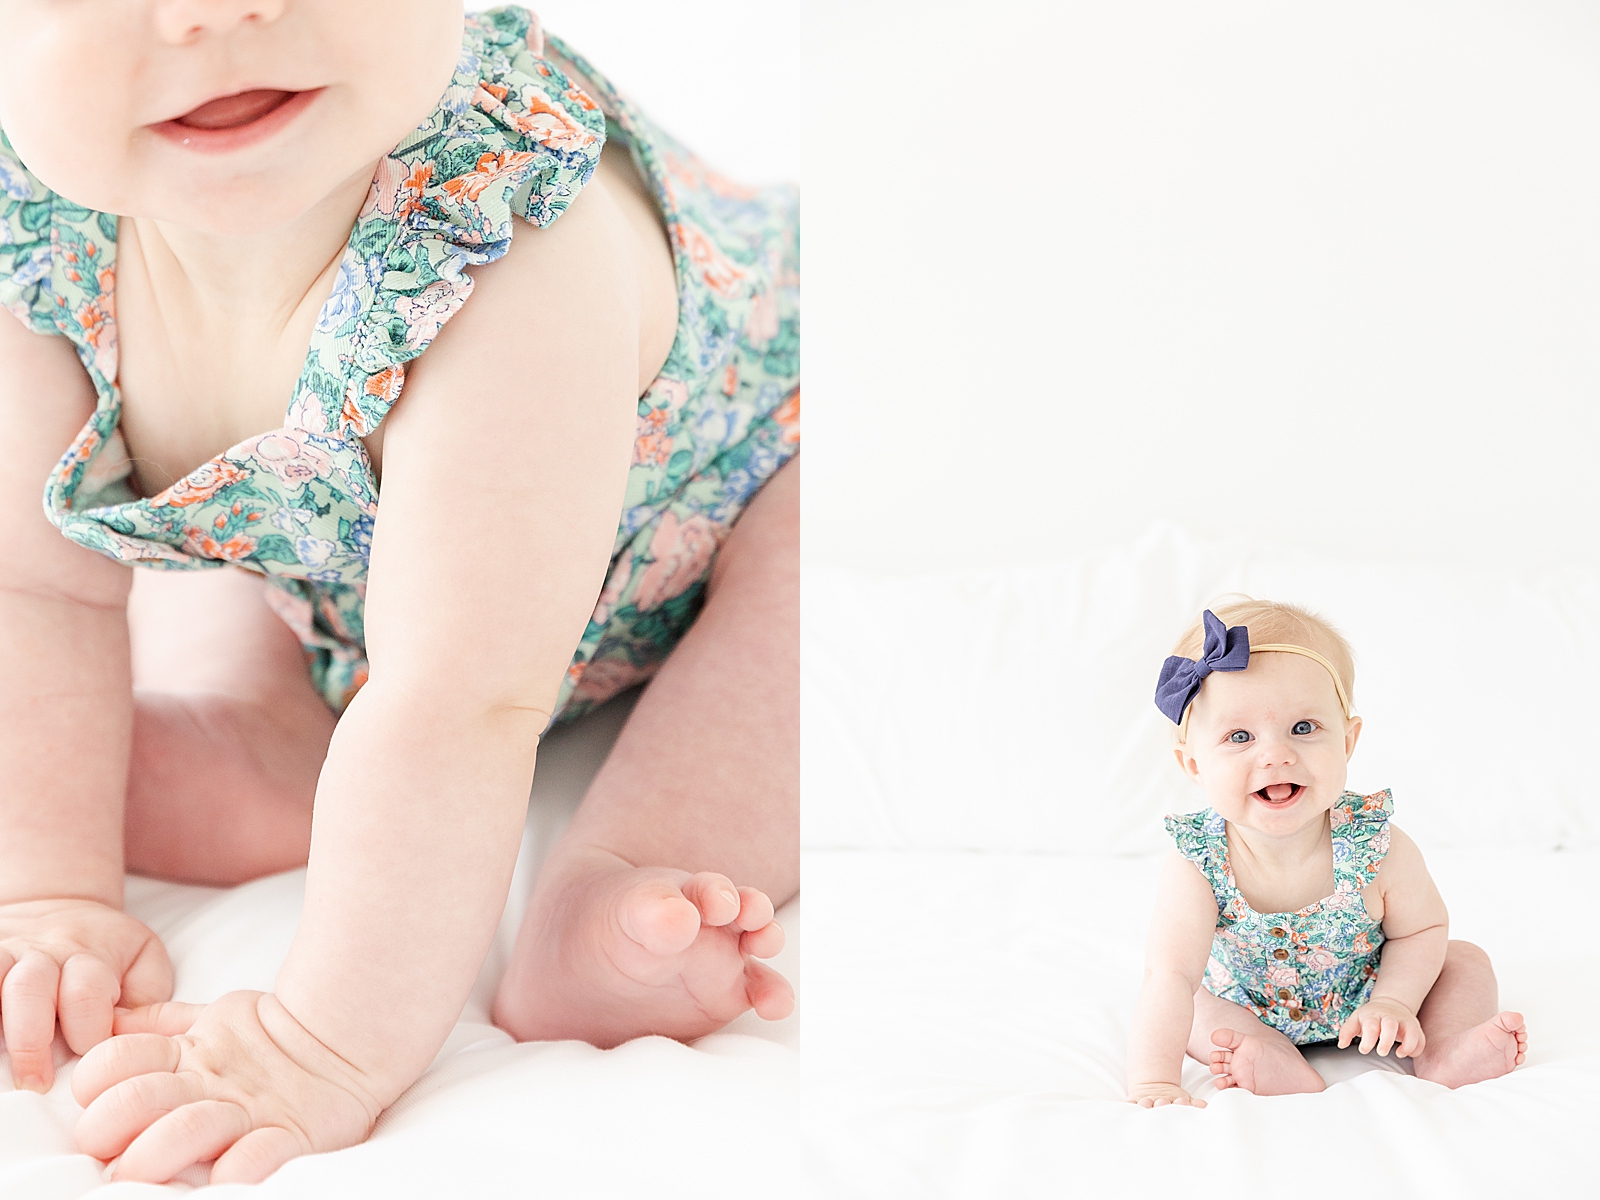 Studio Family Session 6 month old baby smiling and sitting on white bed with close up shot of her fingers and toes